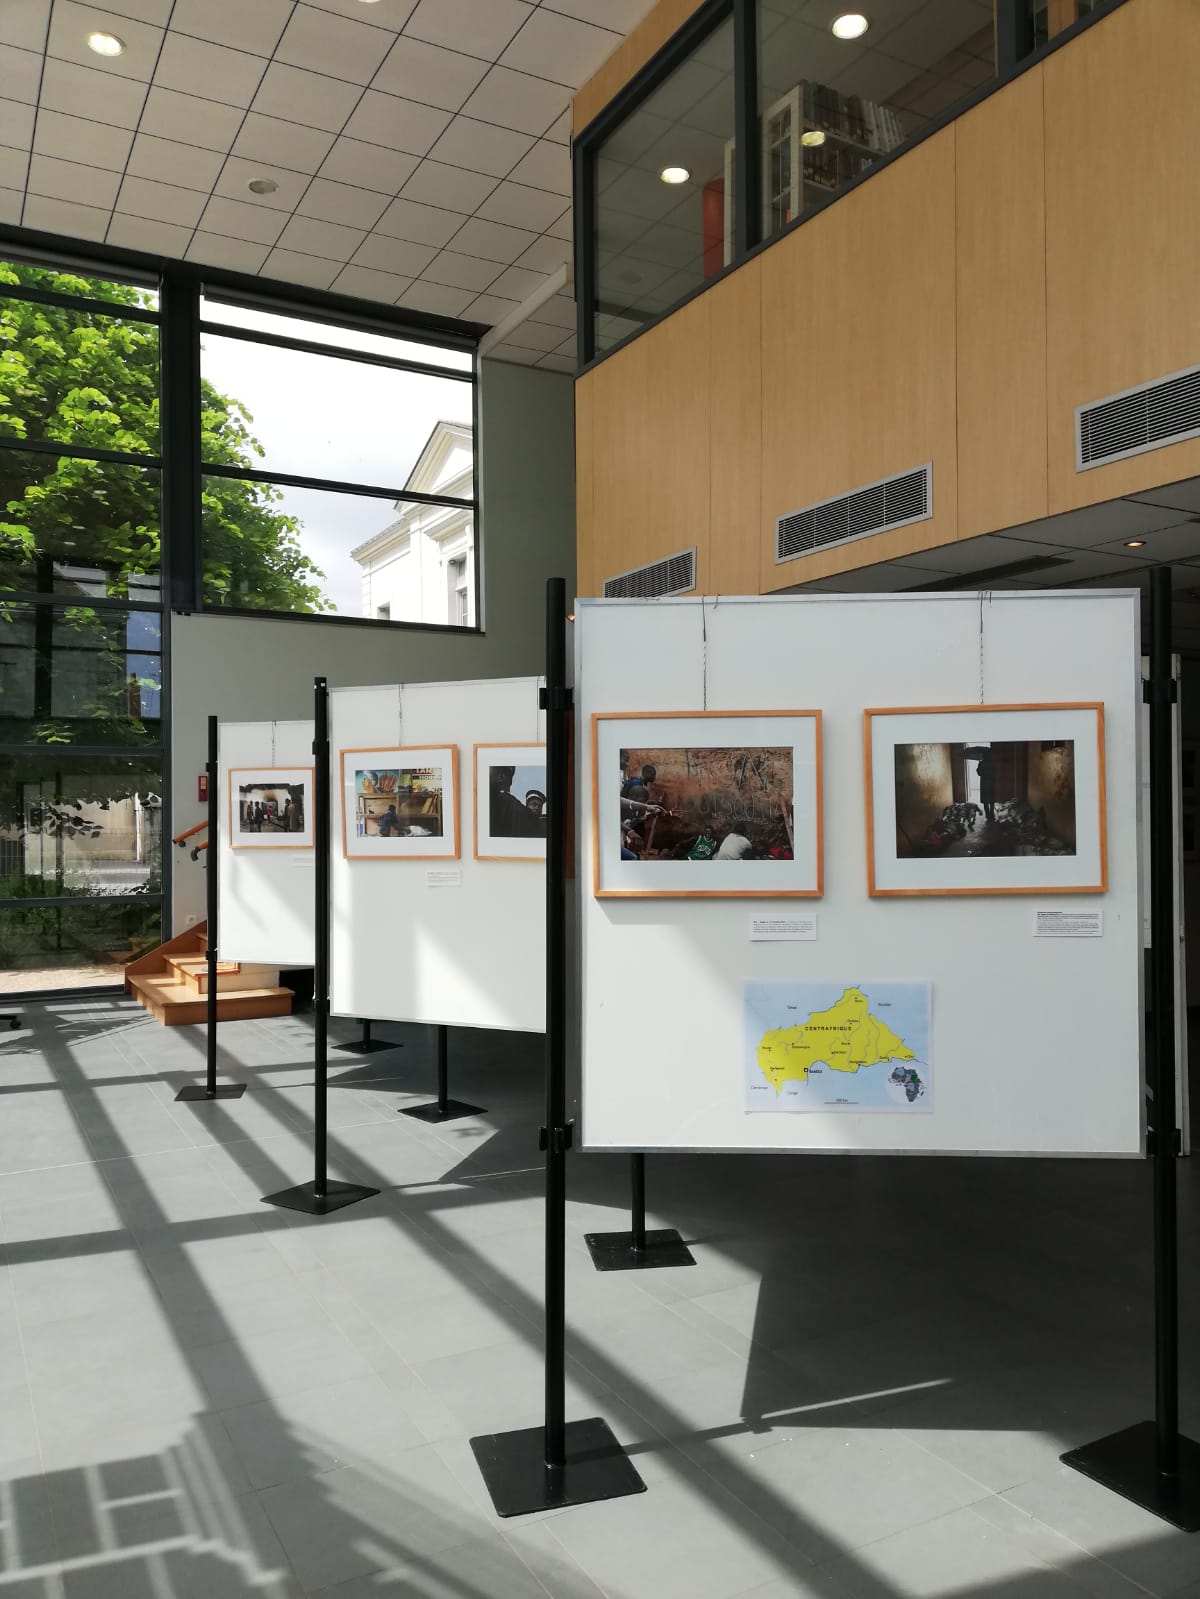 Exhibition at La Ménitré from May 25 to june 6